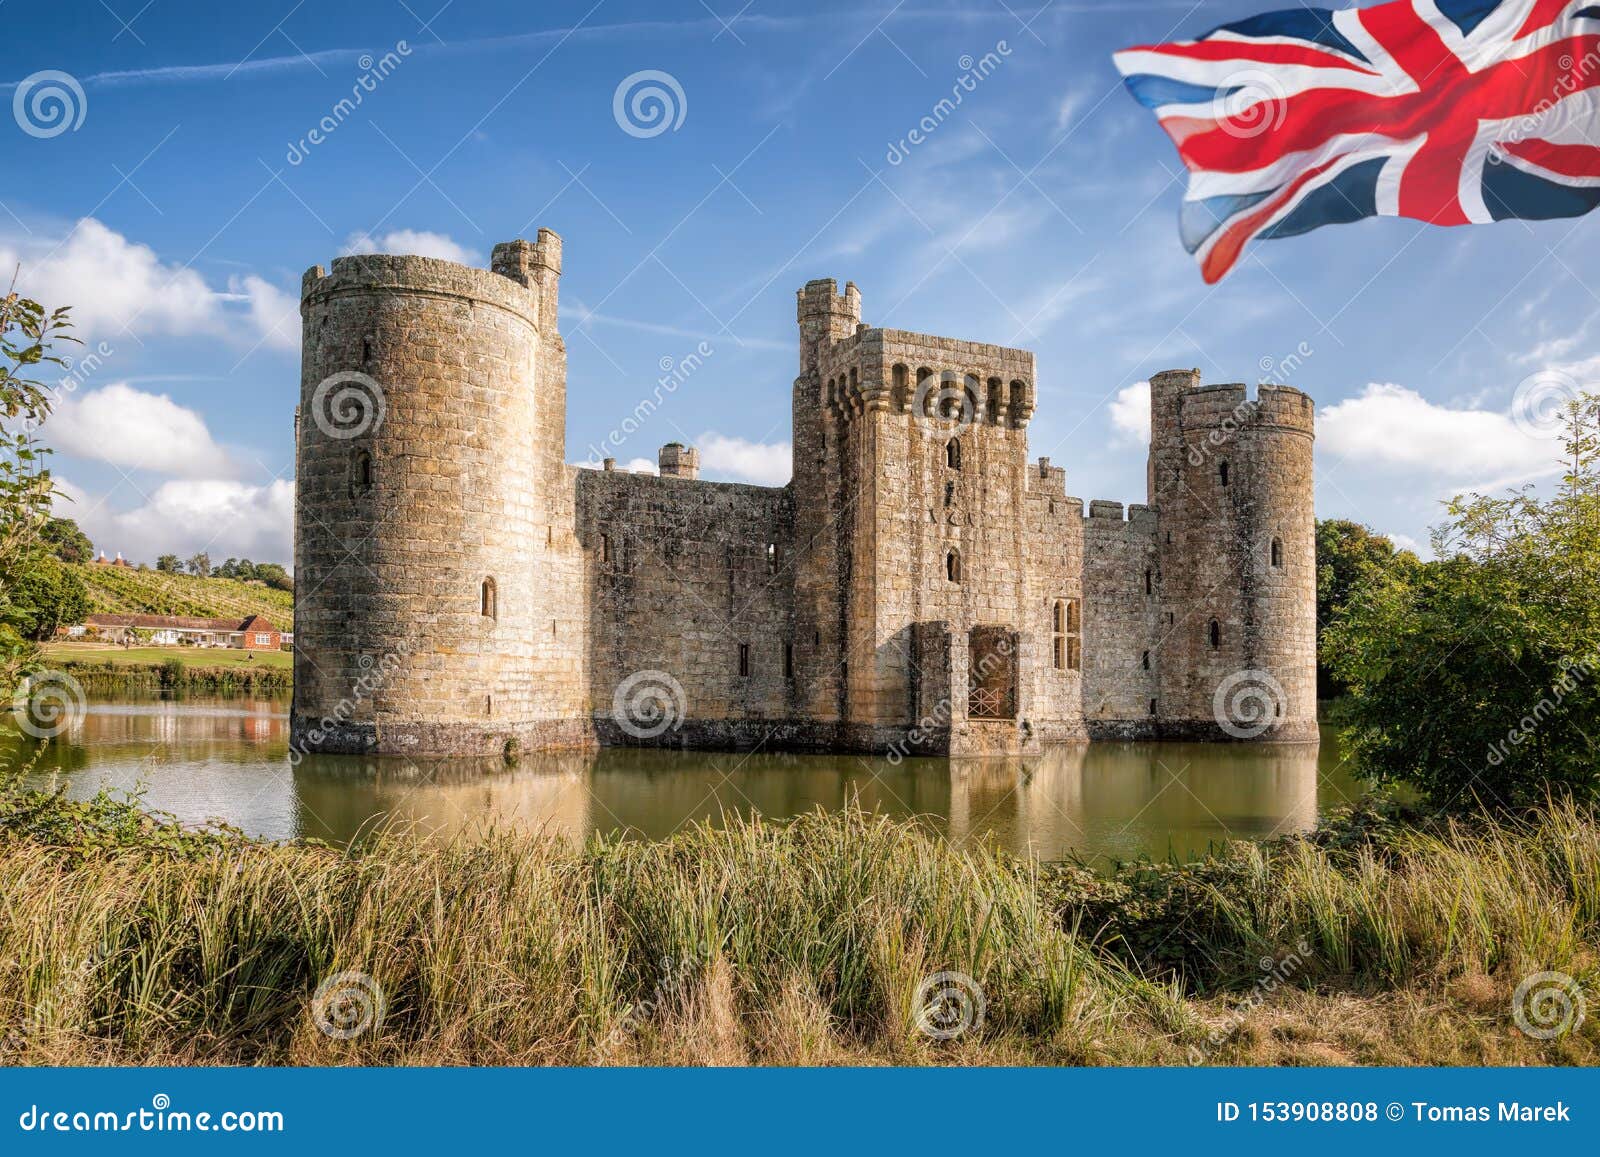 Historic Bodiam Castle With Flag Of England In East  Sussex  